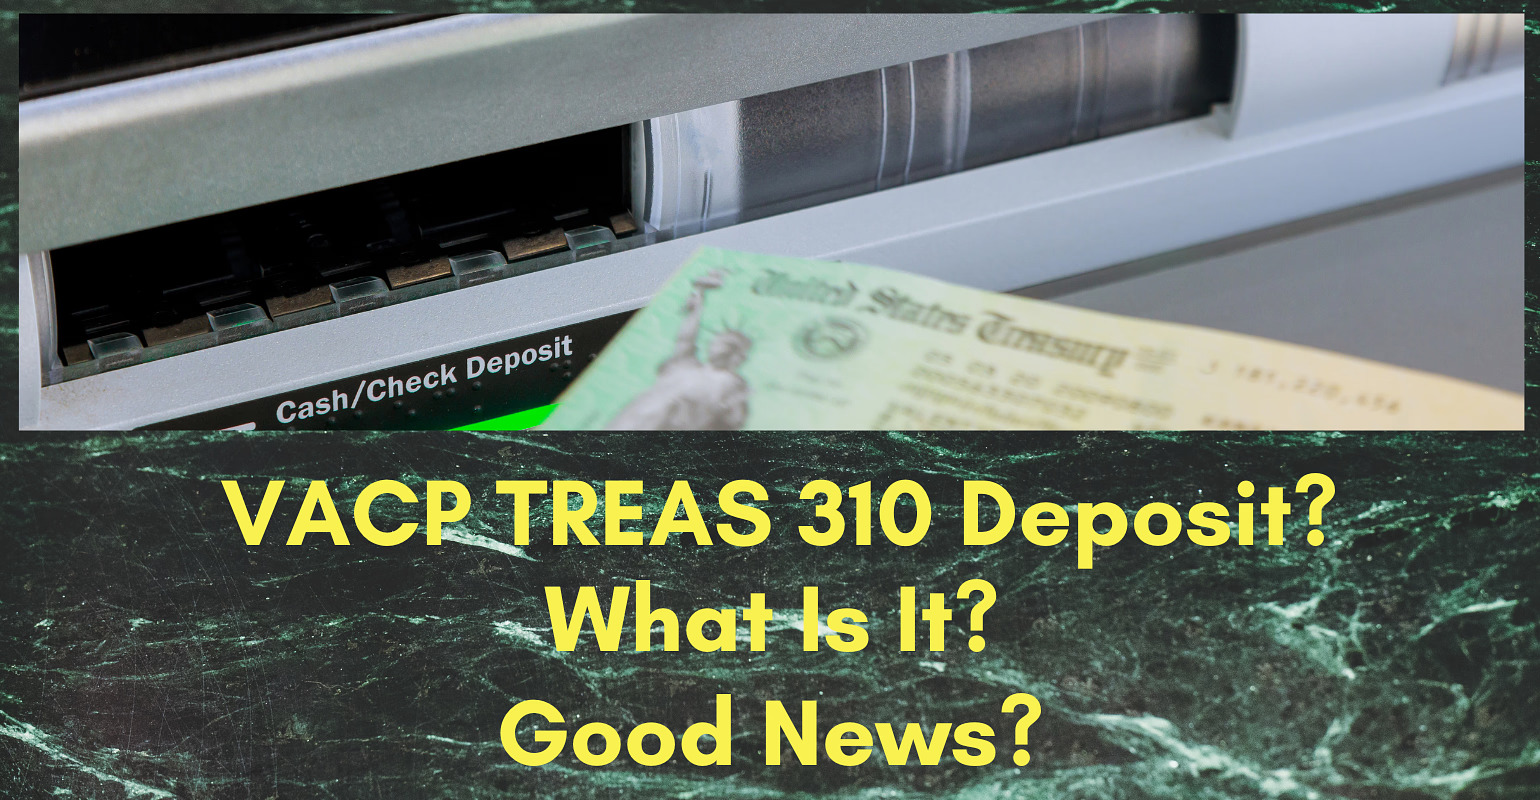 An image of a bank check deposit slot with a partial view of a United States Treasury check underneath bold text overlay that questions "VACP TREAS 310 Deposit? What Is It? Good News?" against a dark green marbled background.